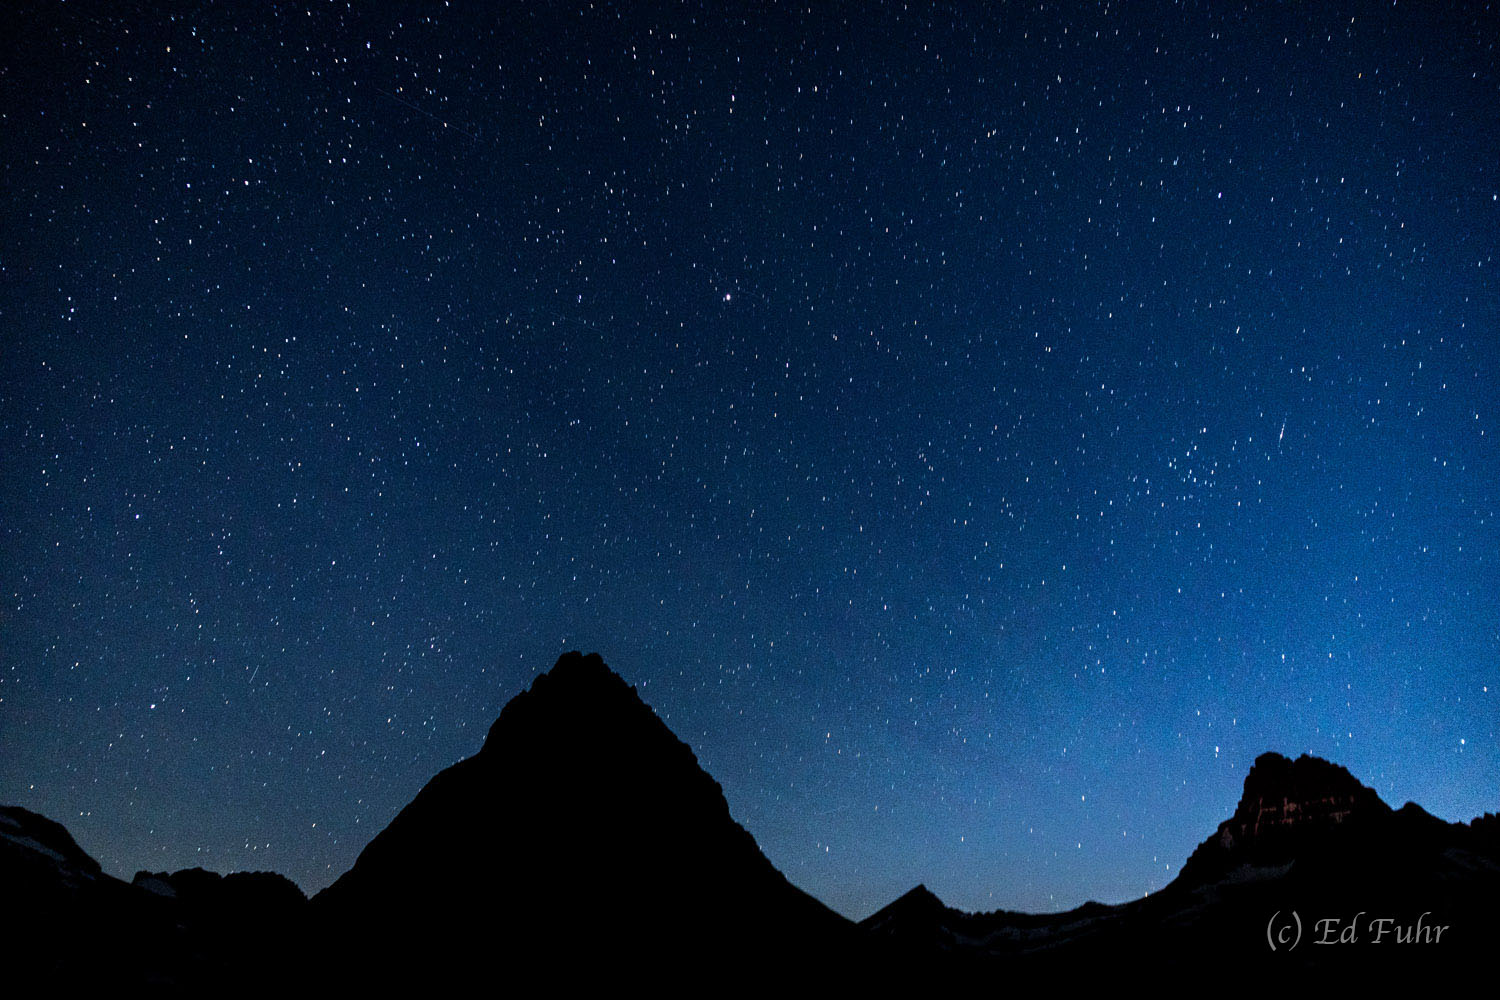 After dusk, an infinite number of stars emerge above the serenity of Many Glacier.